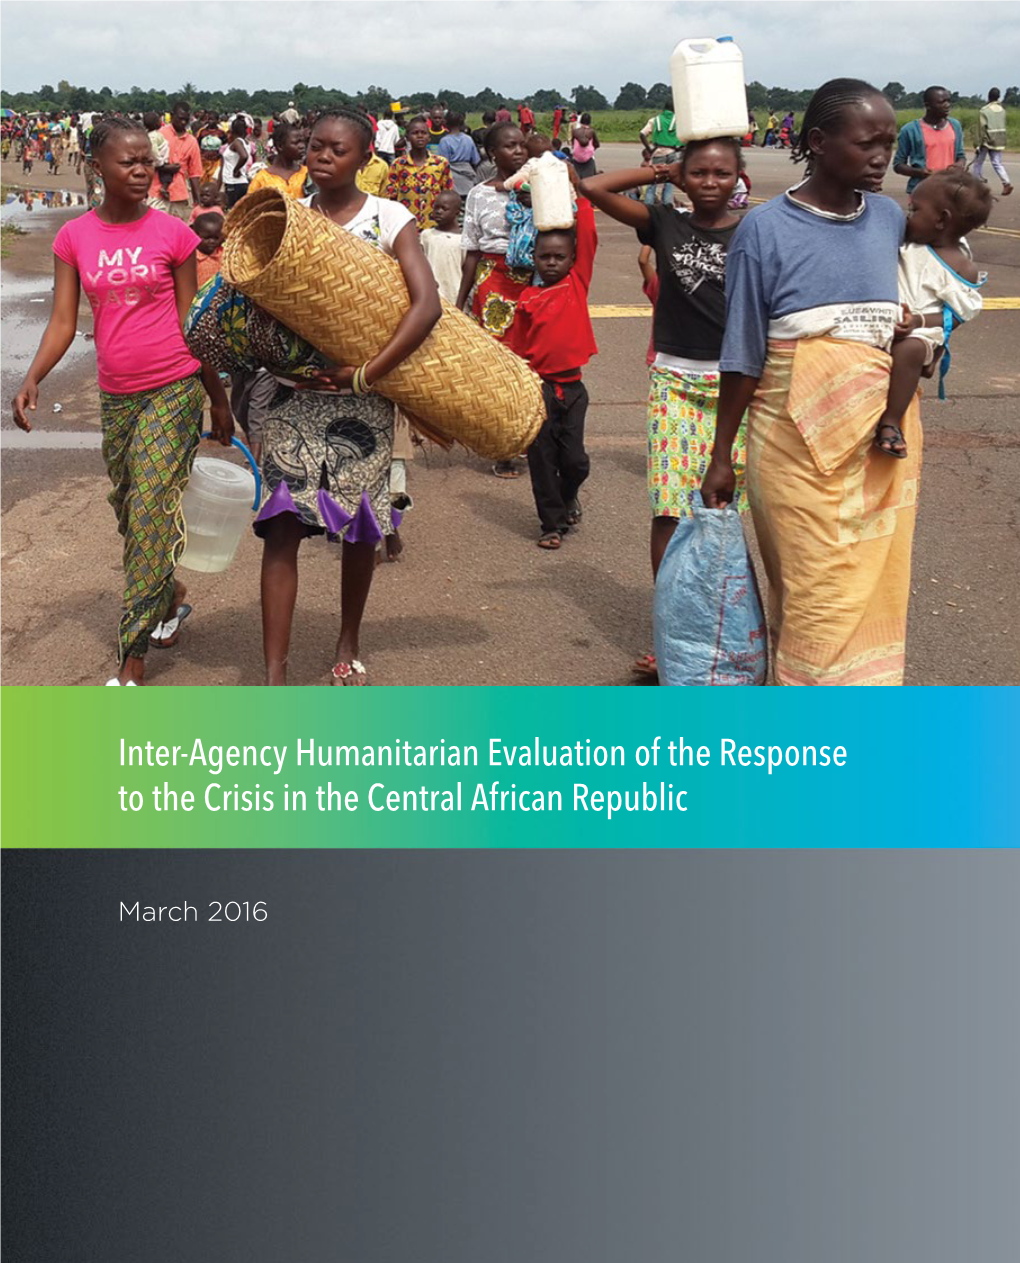 Inter-Agency Humanitarian Evaluation of the Response to the Crisis in the Central African Republic